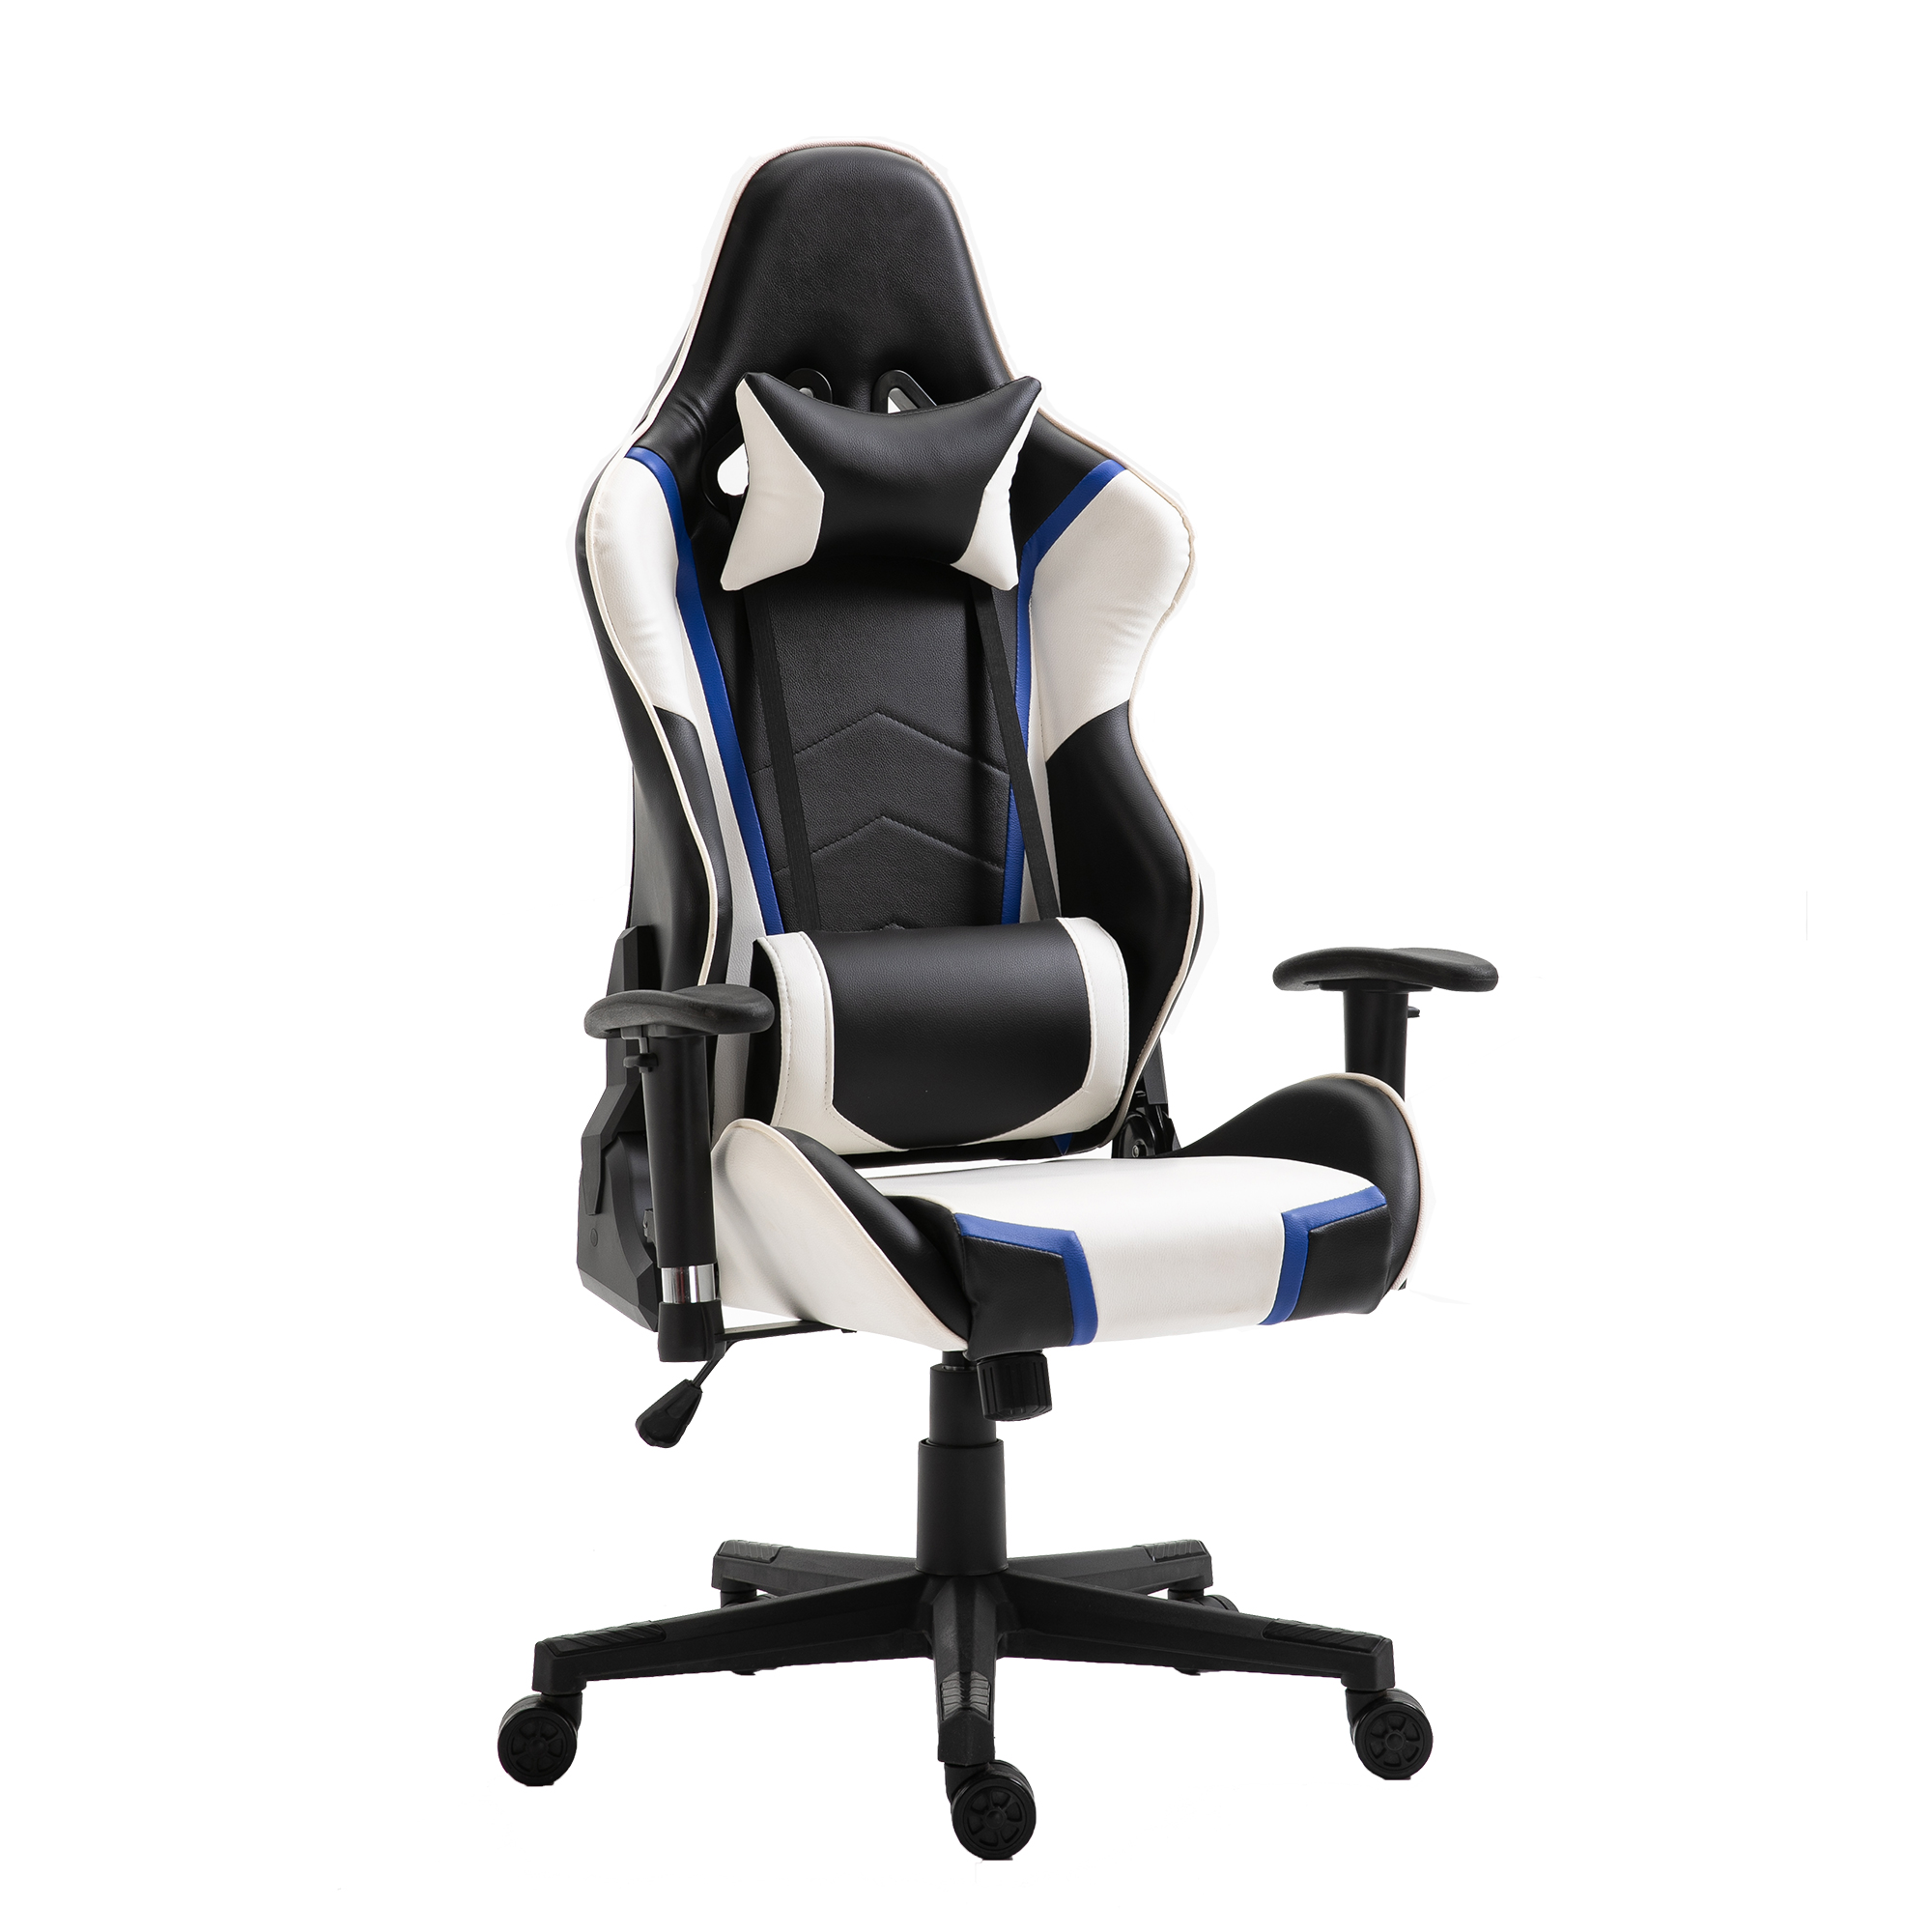 Modern Ergonomic High Back Gamer Dropshipping PU Leather Computer Racing Gaming Chair Featured Image